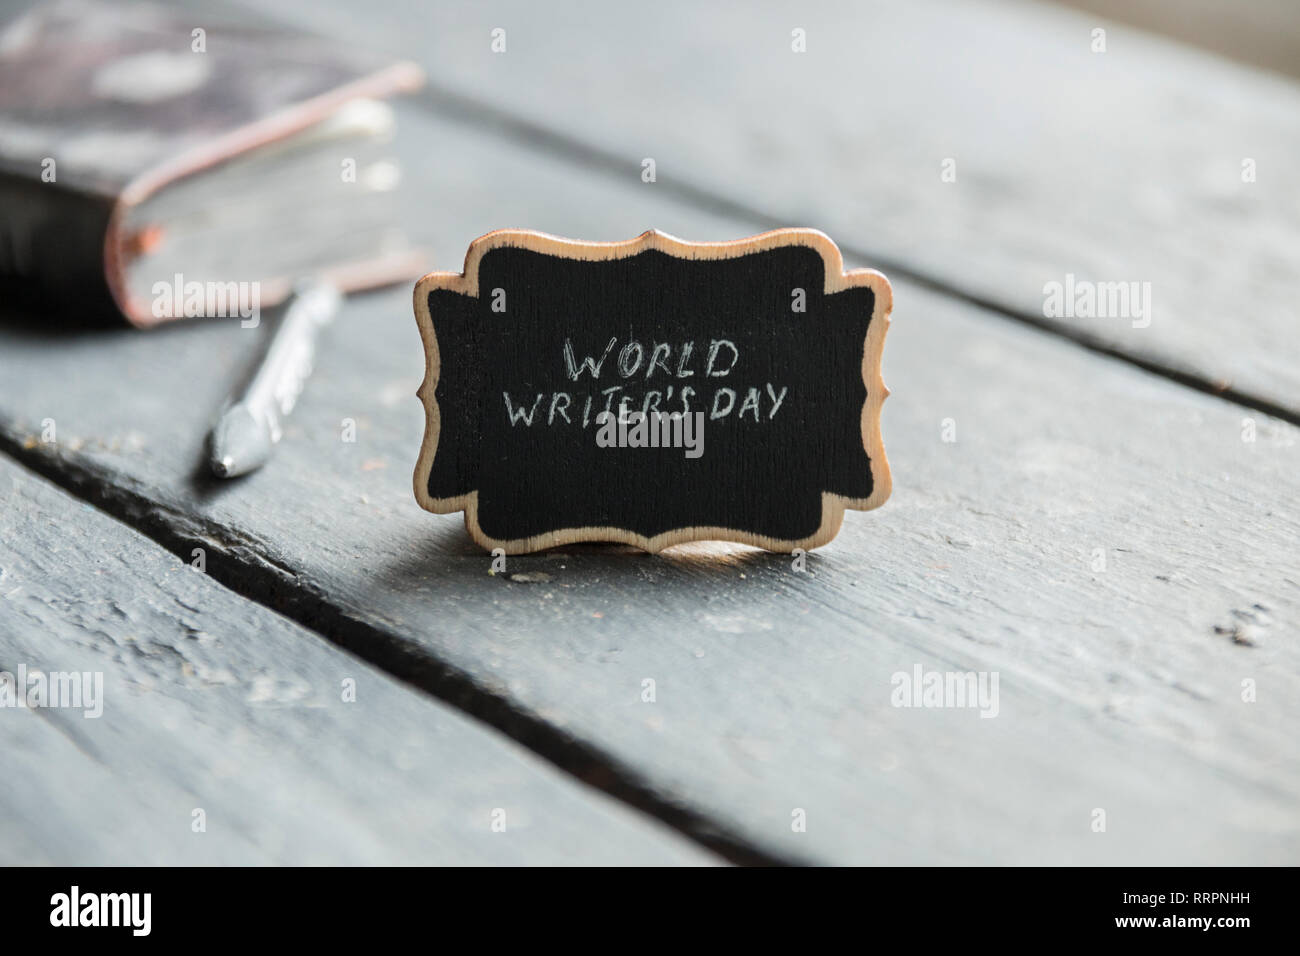 world writers day concept - inscription on the plate Stock Photo